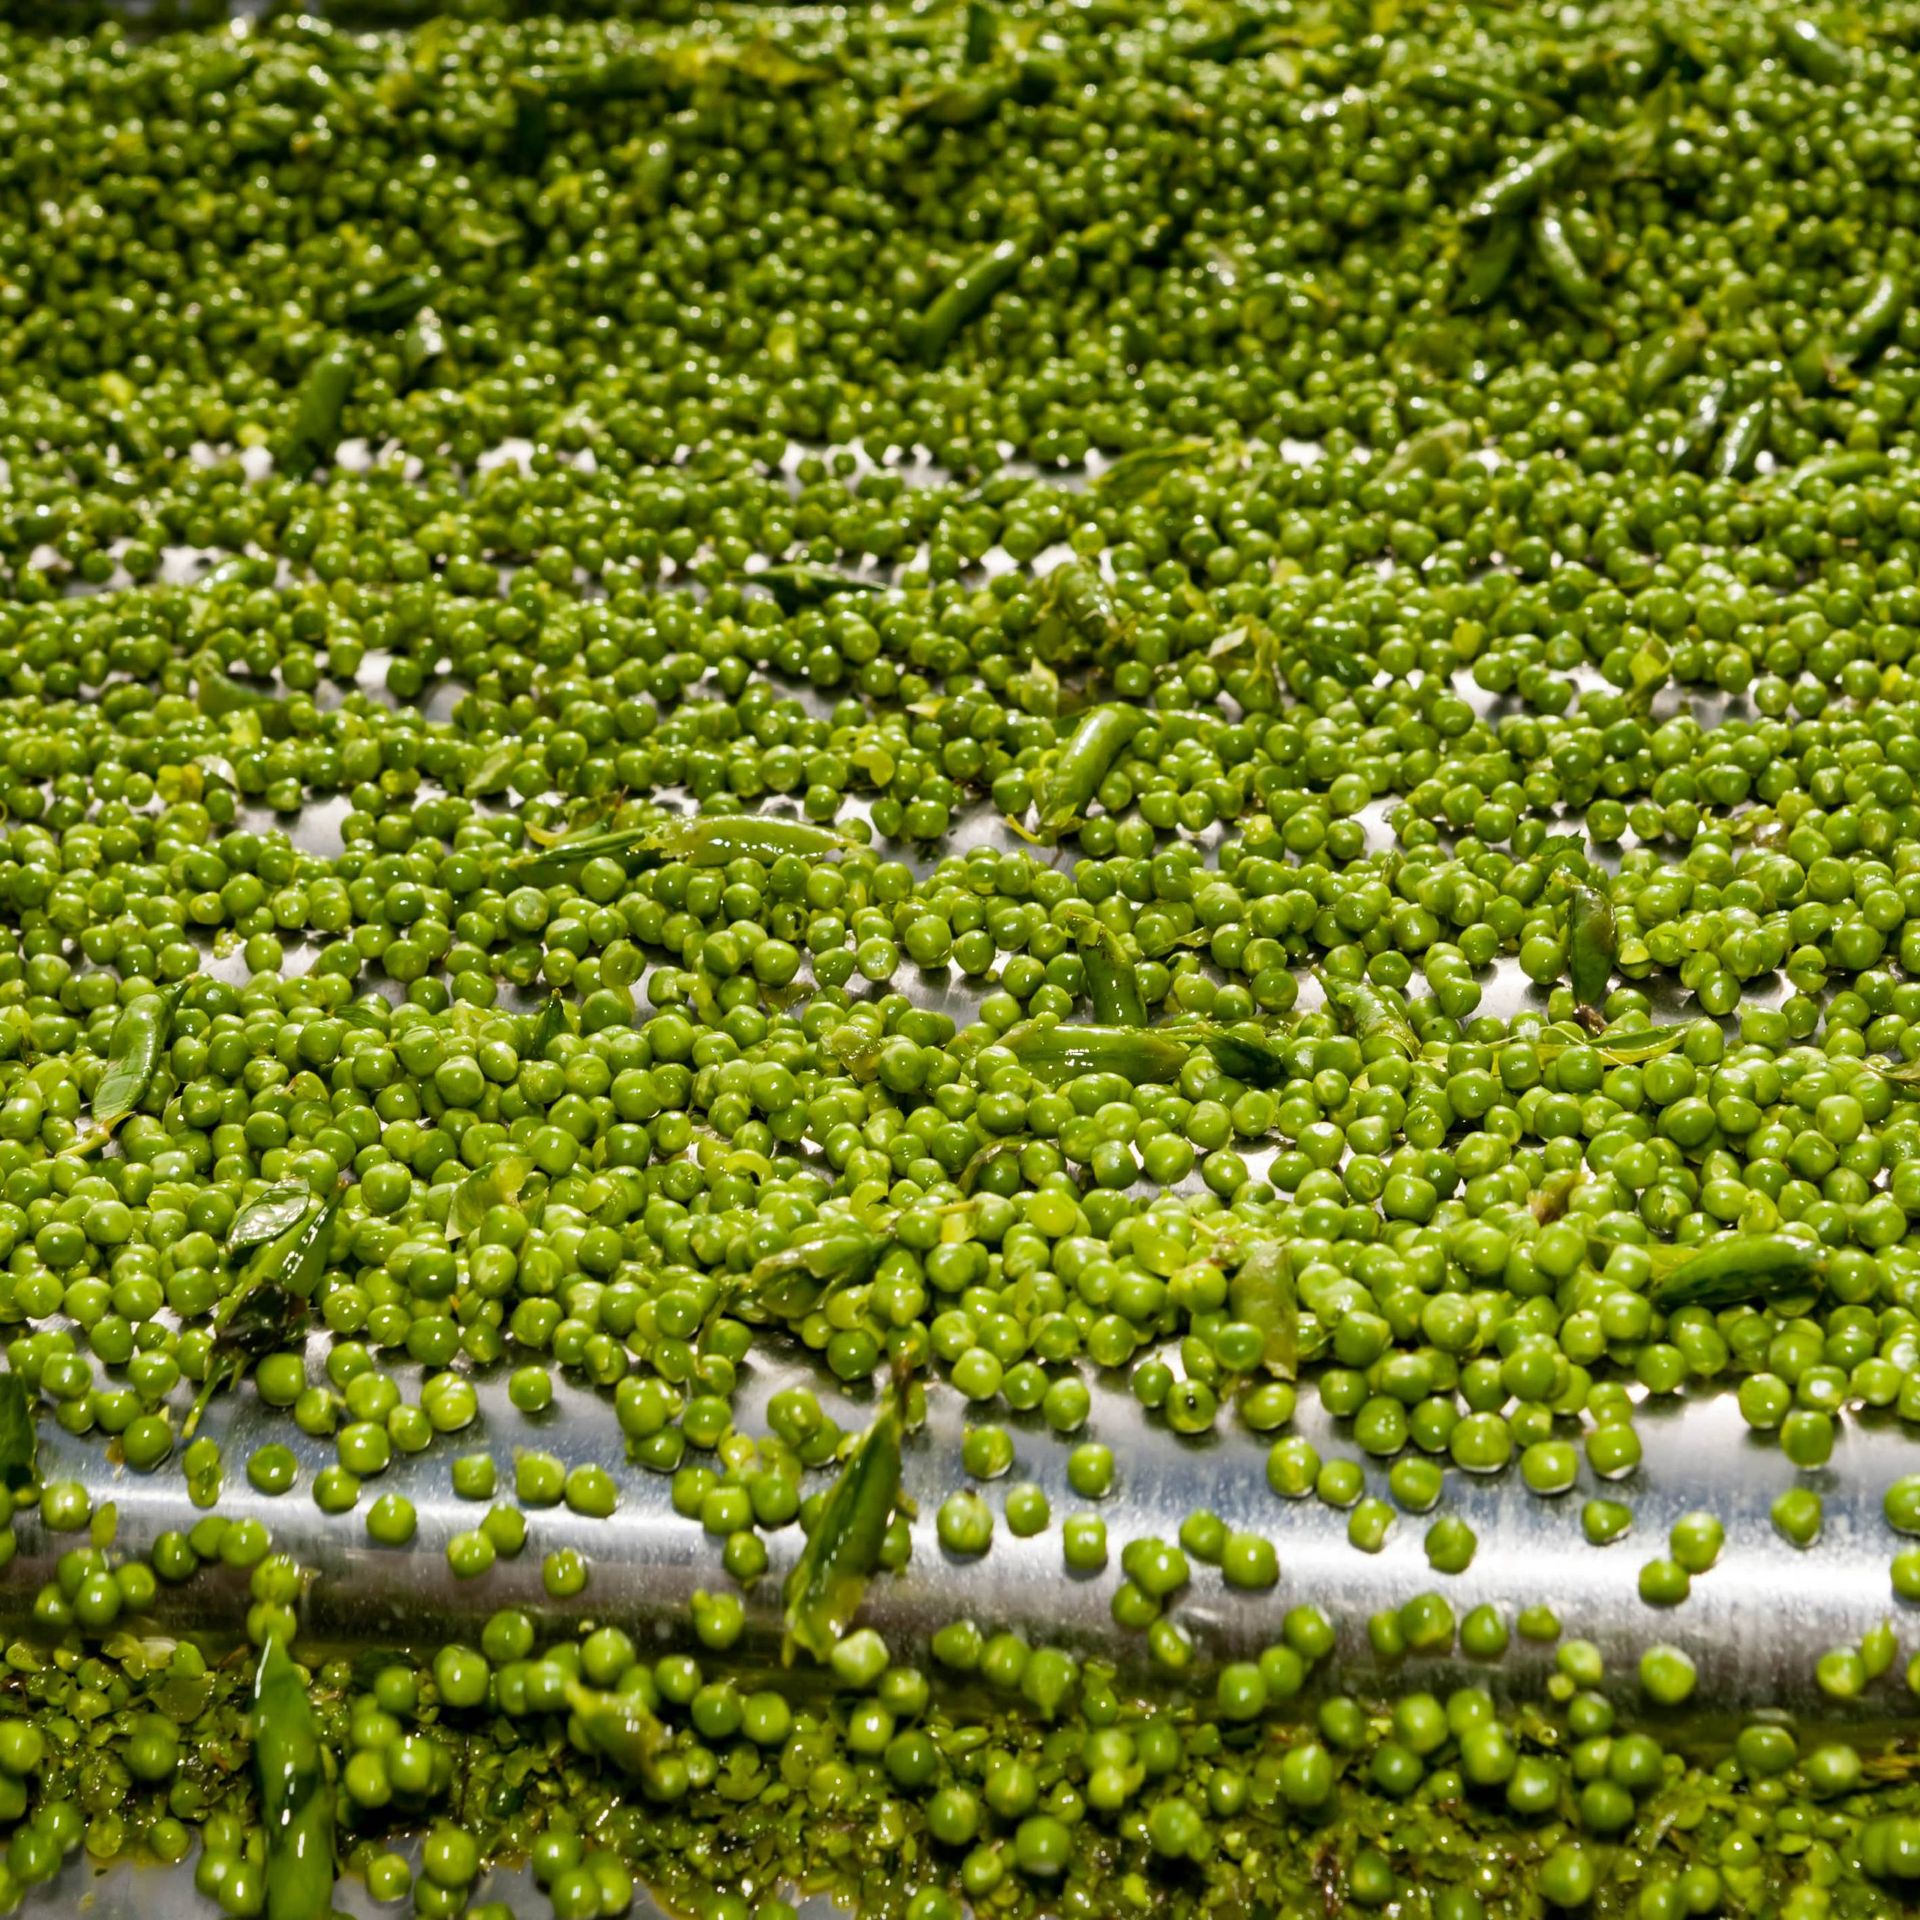 Image of peas on a production line before processing 